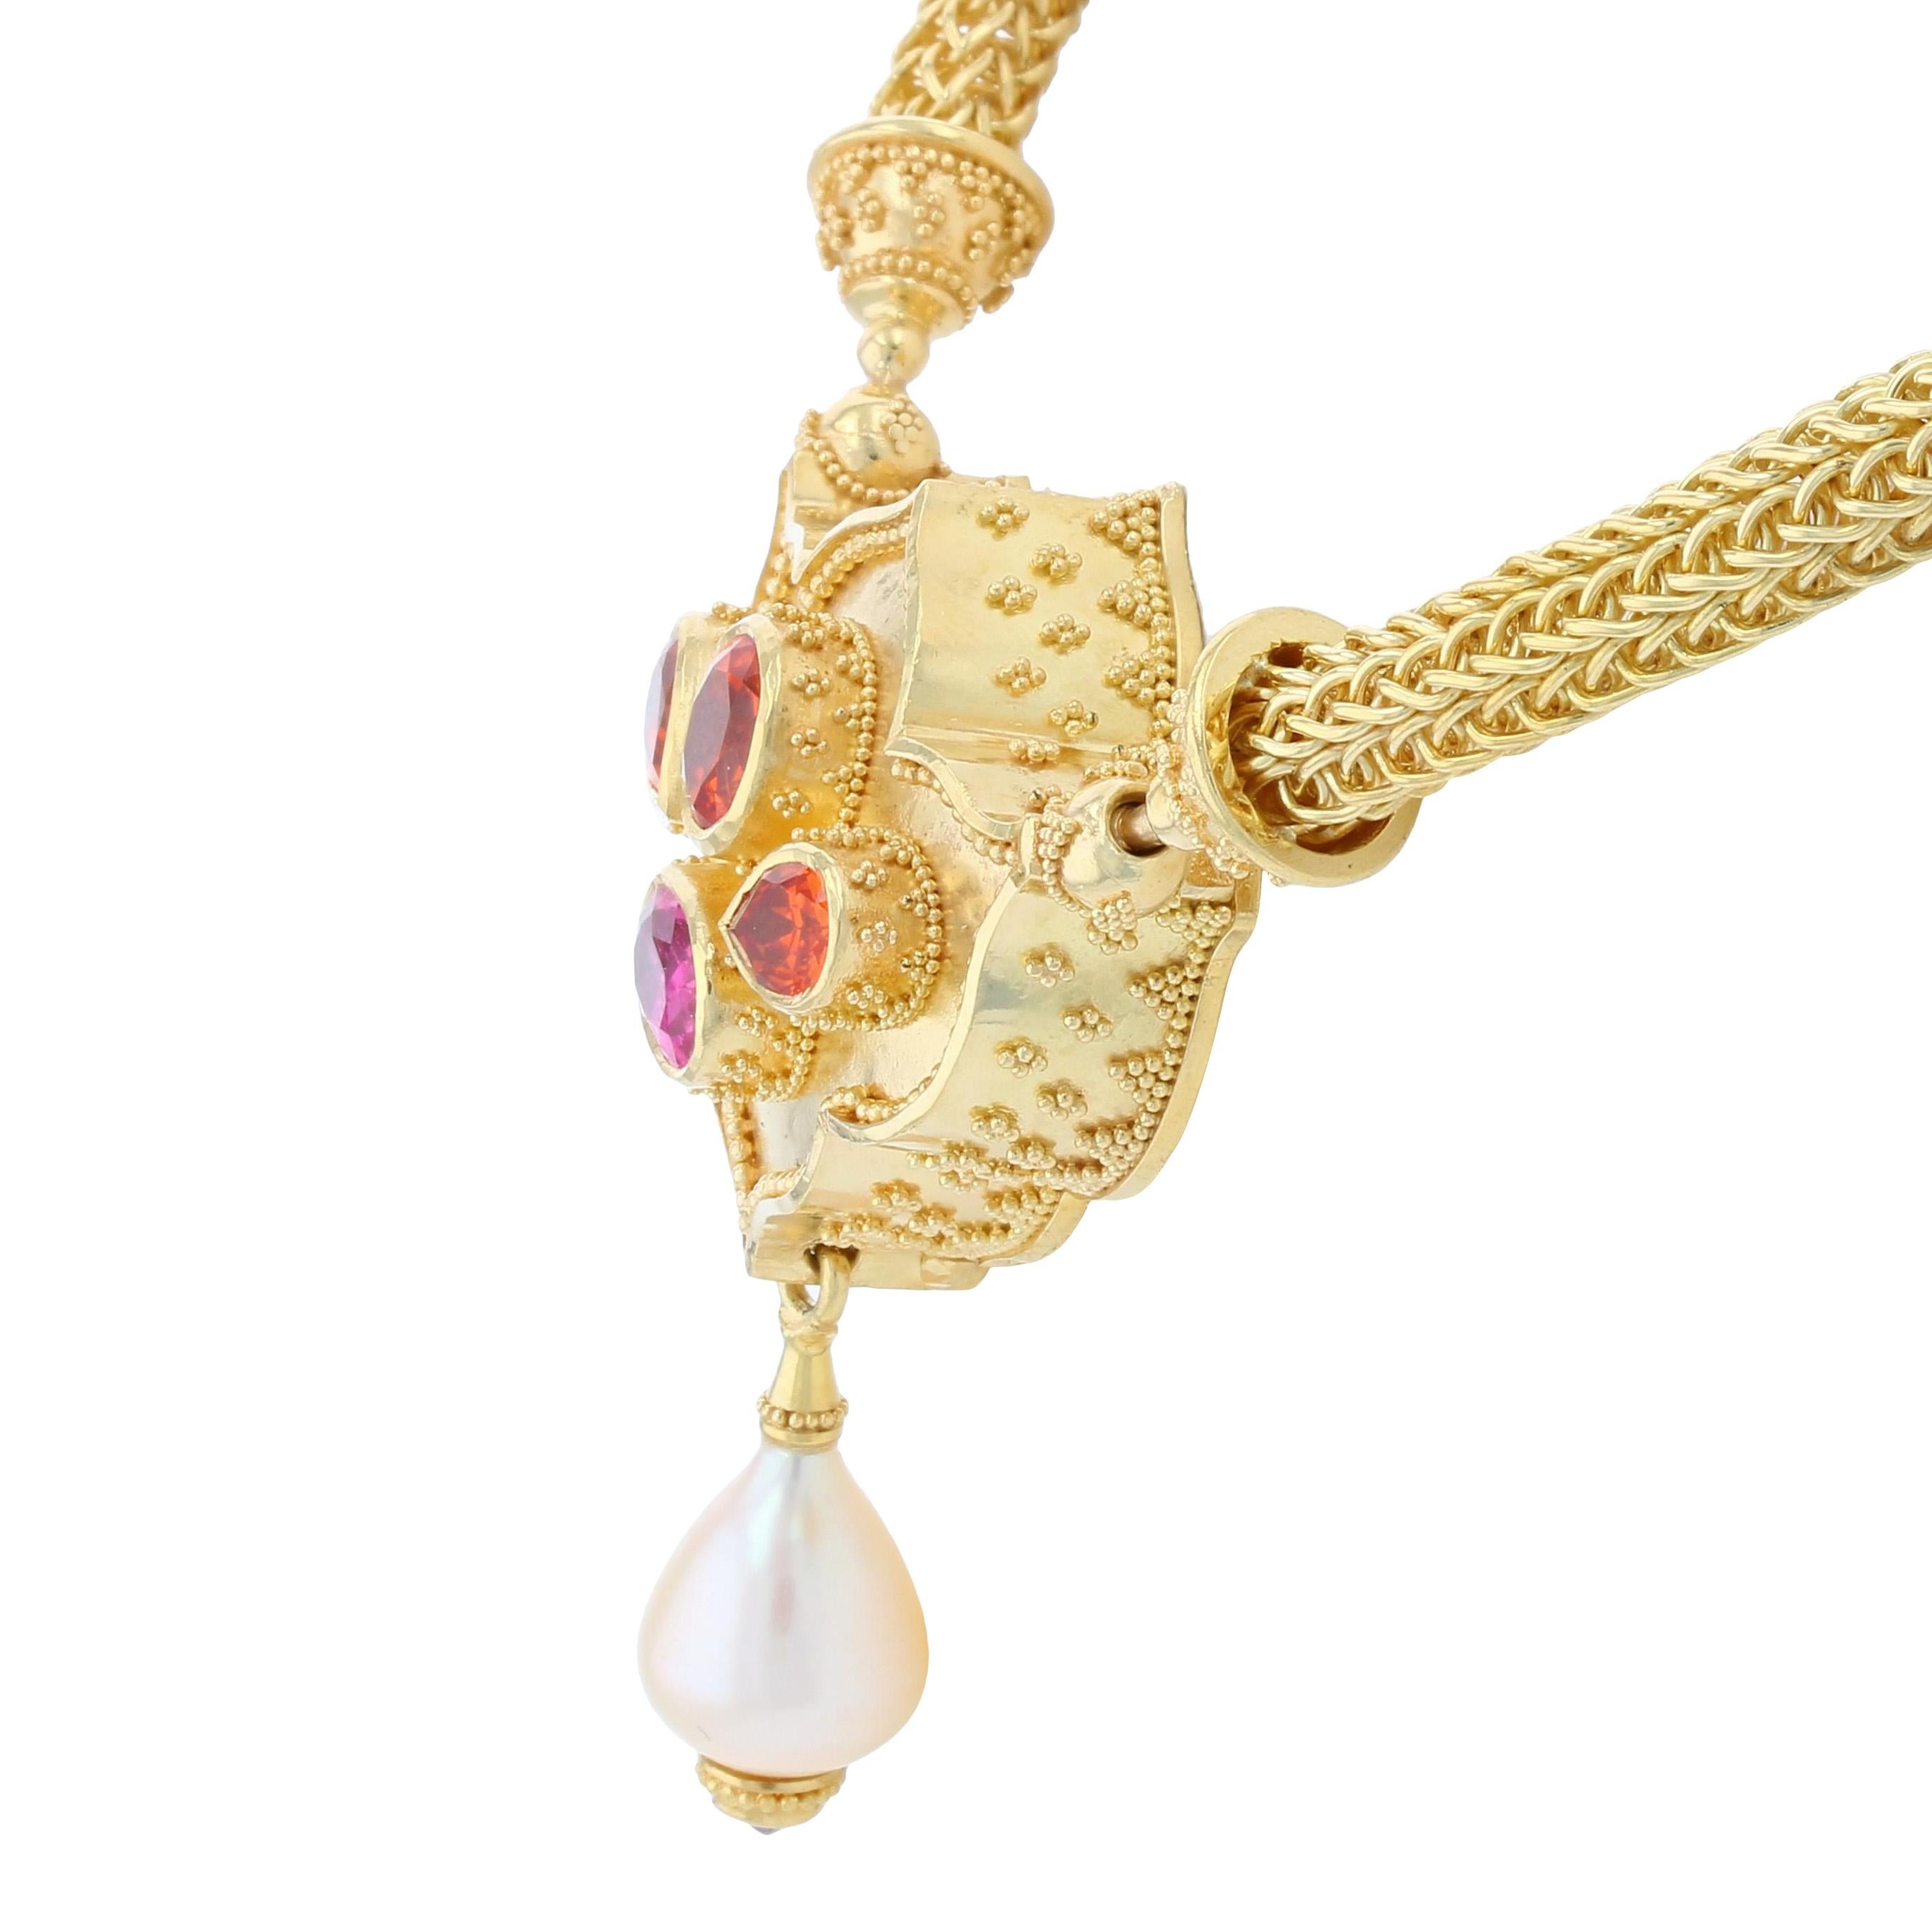 Mixed Cut Kent Raible's Flower Jewel 18K Pendant Necklace with Mandarin Garnets and Spinel For Sale